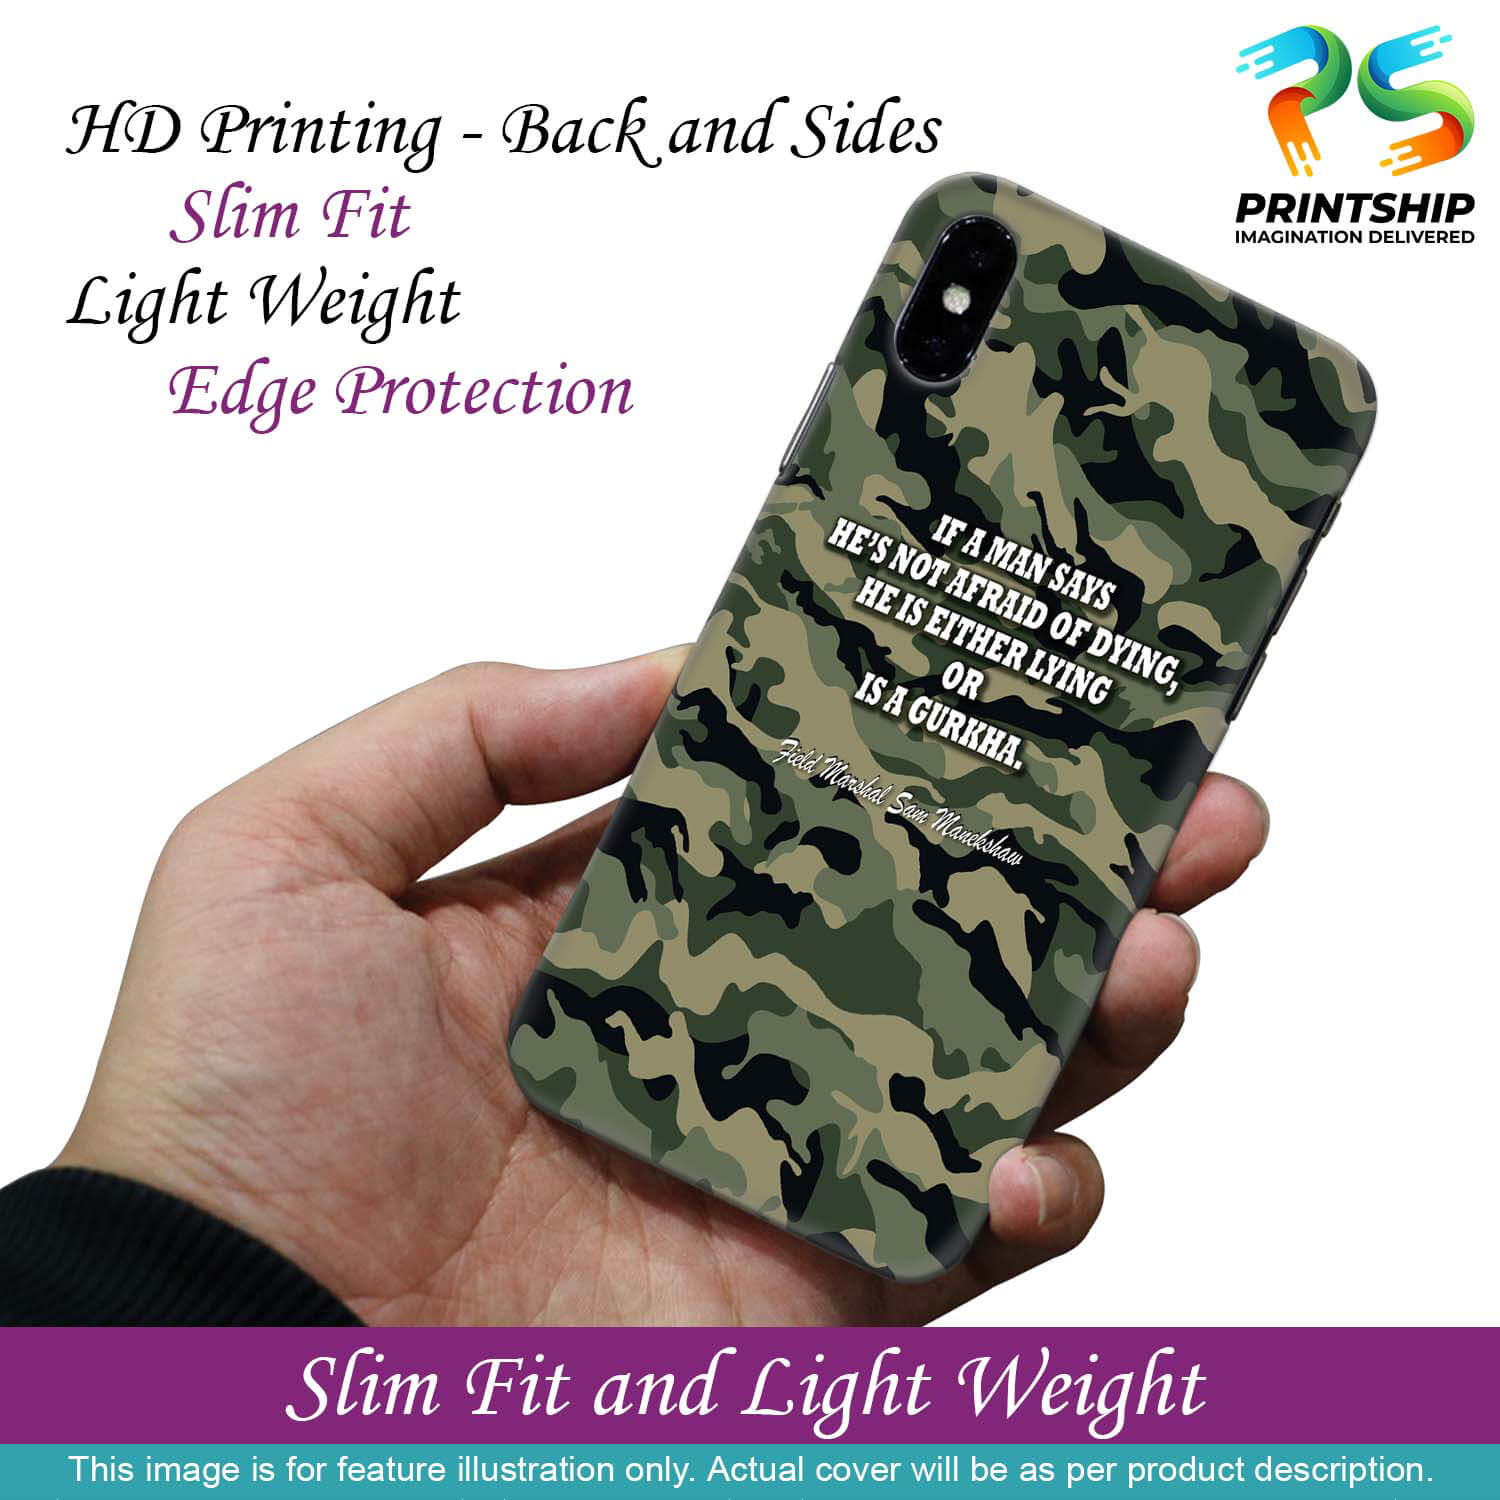 W0450-Indian Army Quote Back Cover for Samsung Galaxy M30